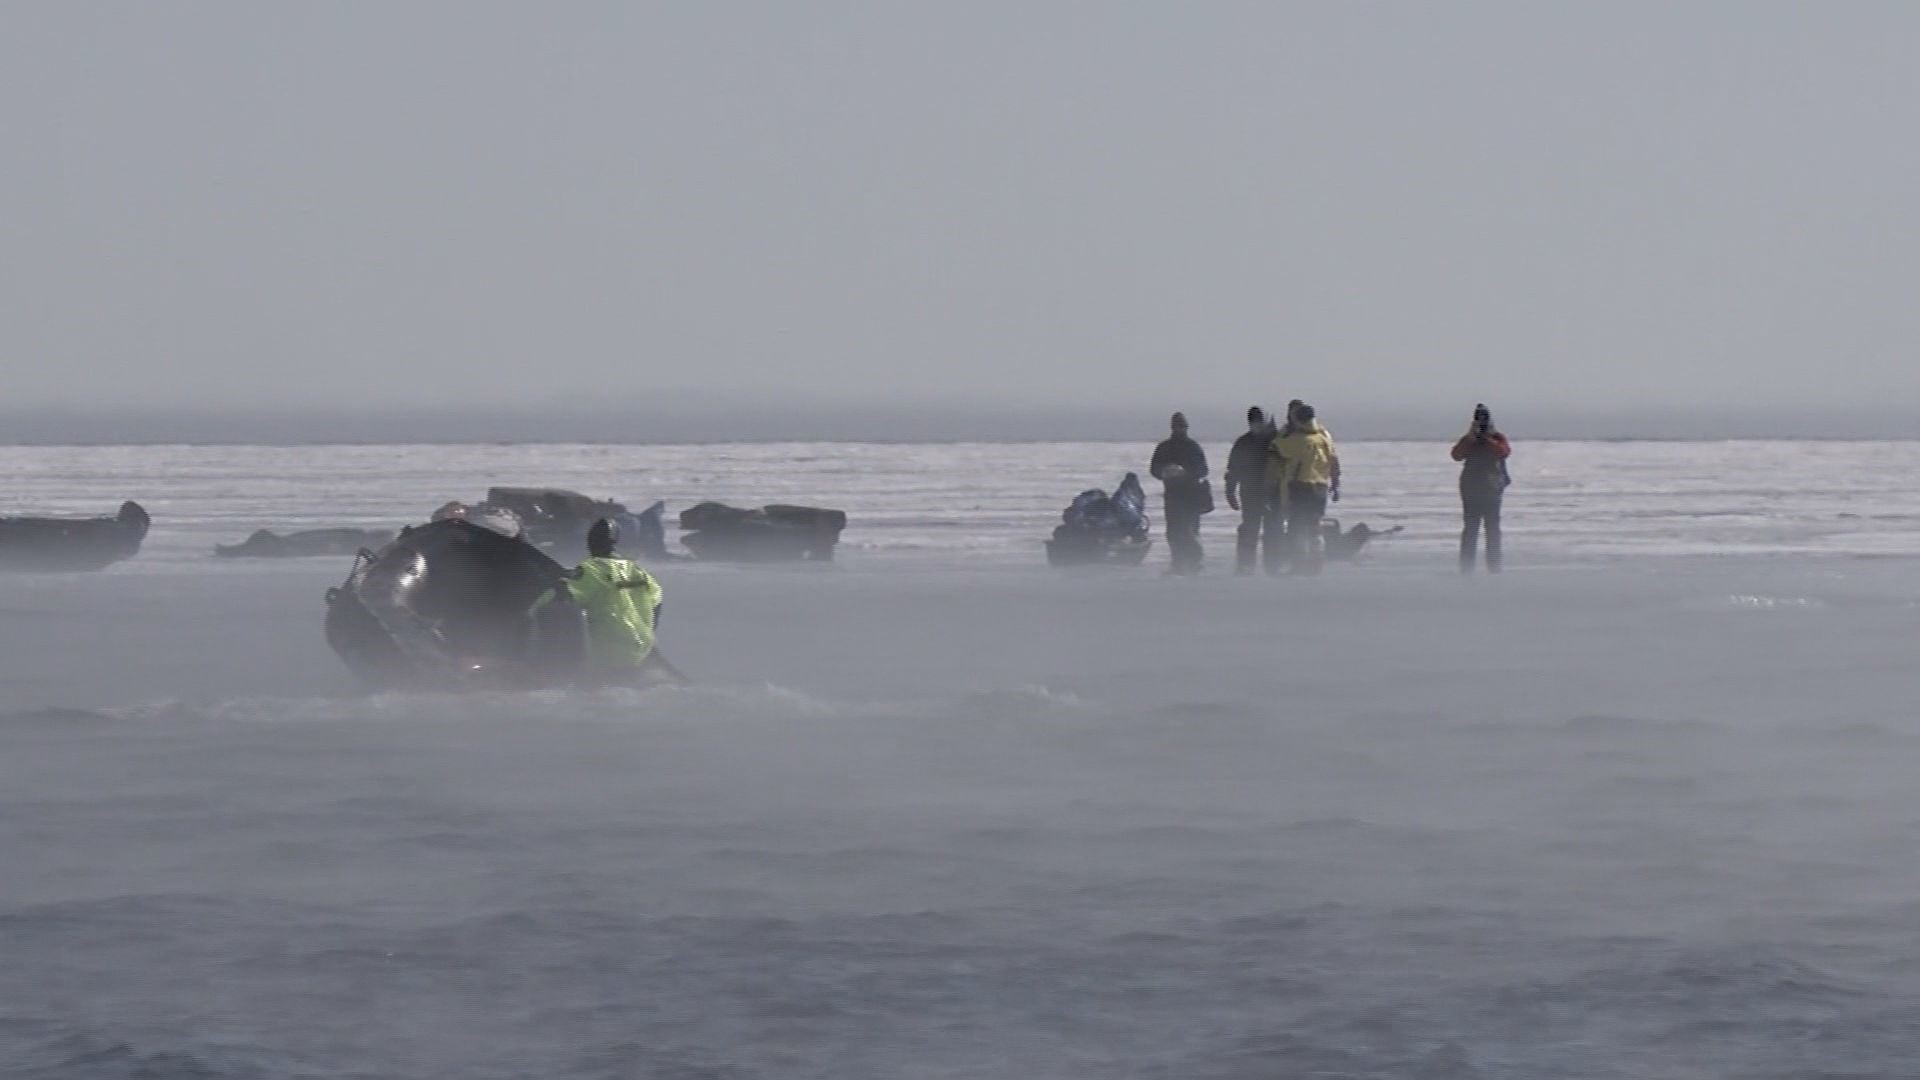 More than two dozen anglers are safe after a natural mishap forced their rescue from an ice flow.